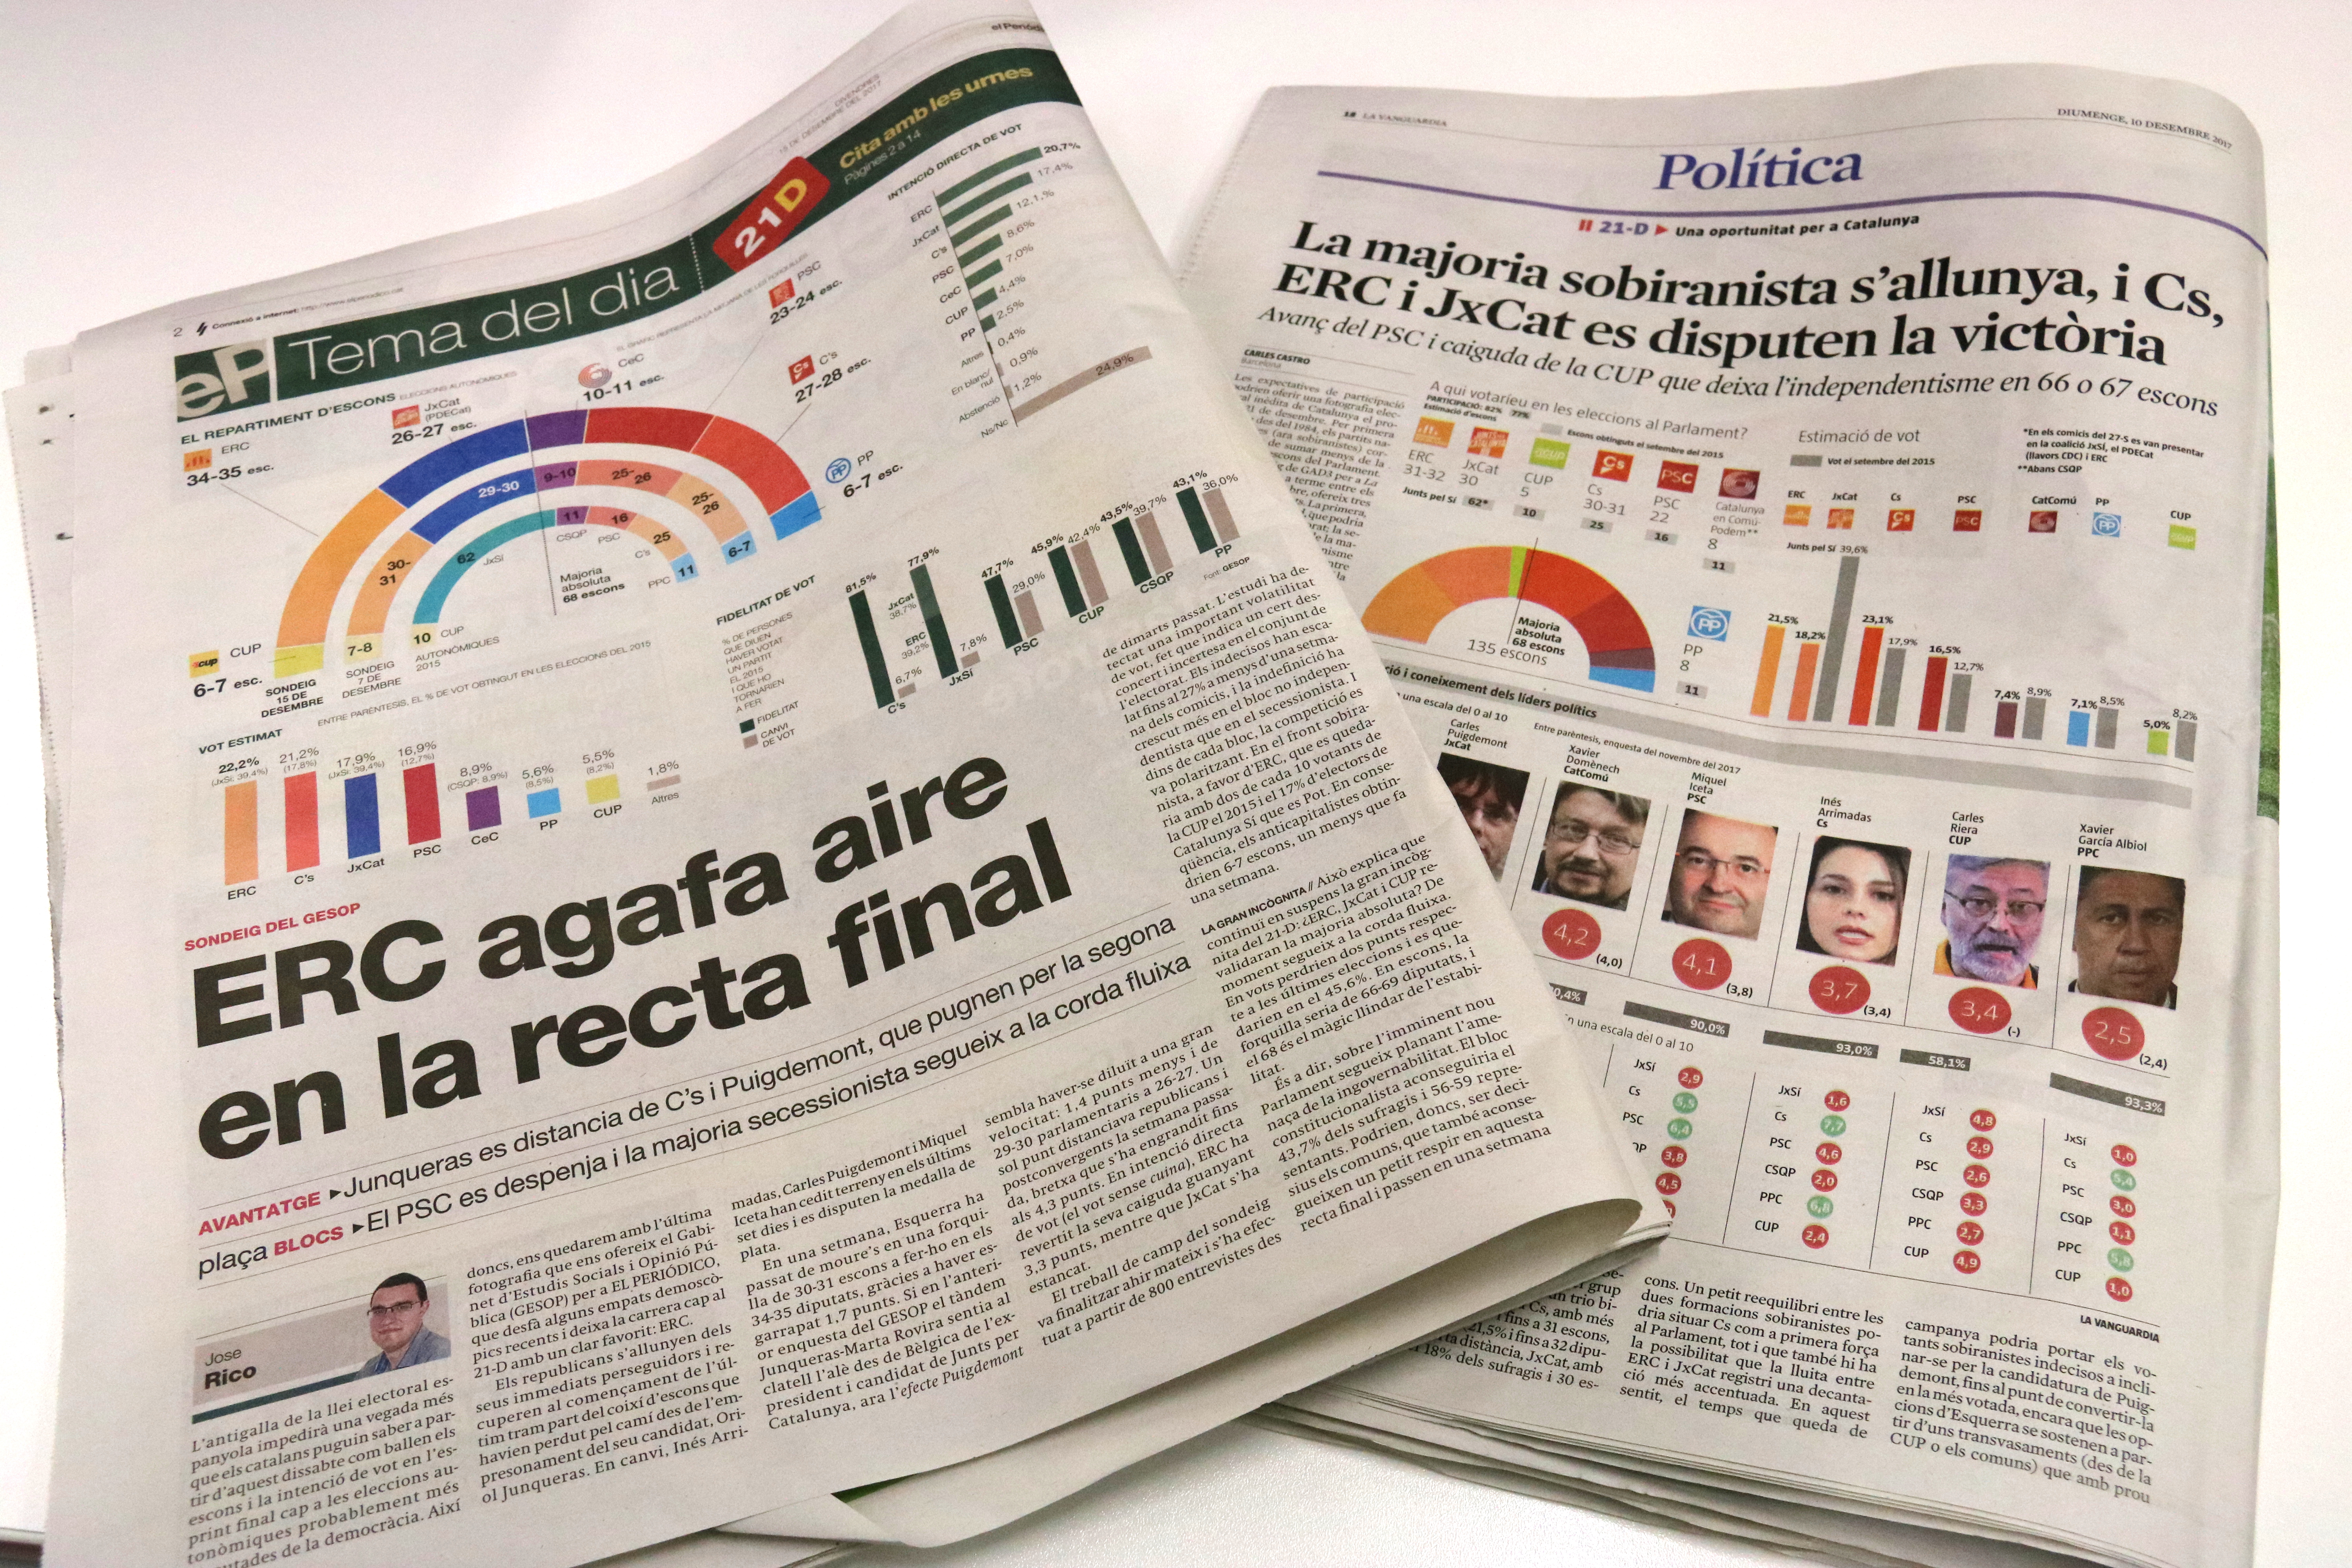 Friday's polls in 'El Periodico' and 'El Pais' newspapers (by ACN)